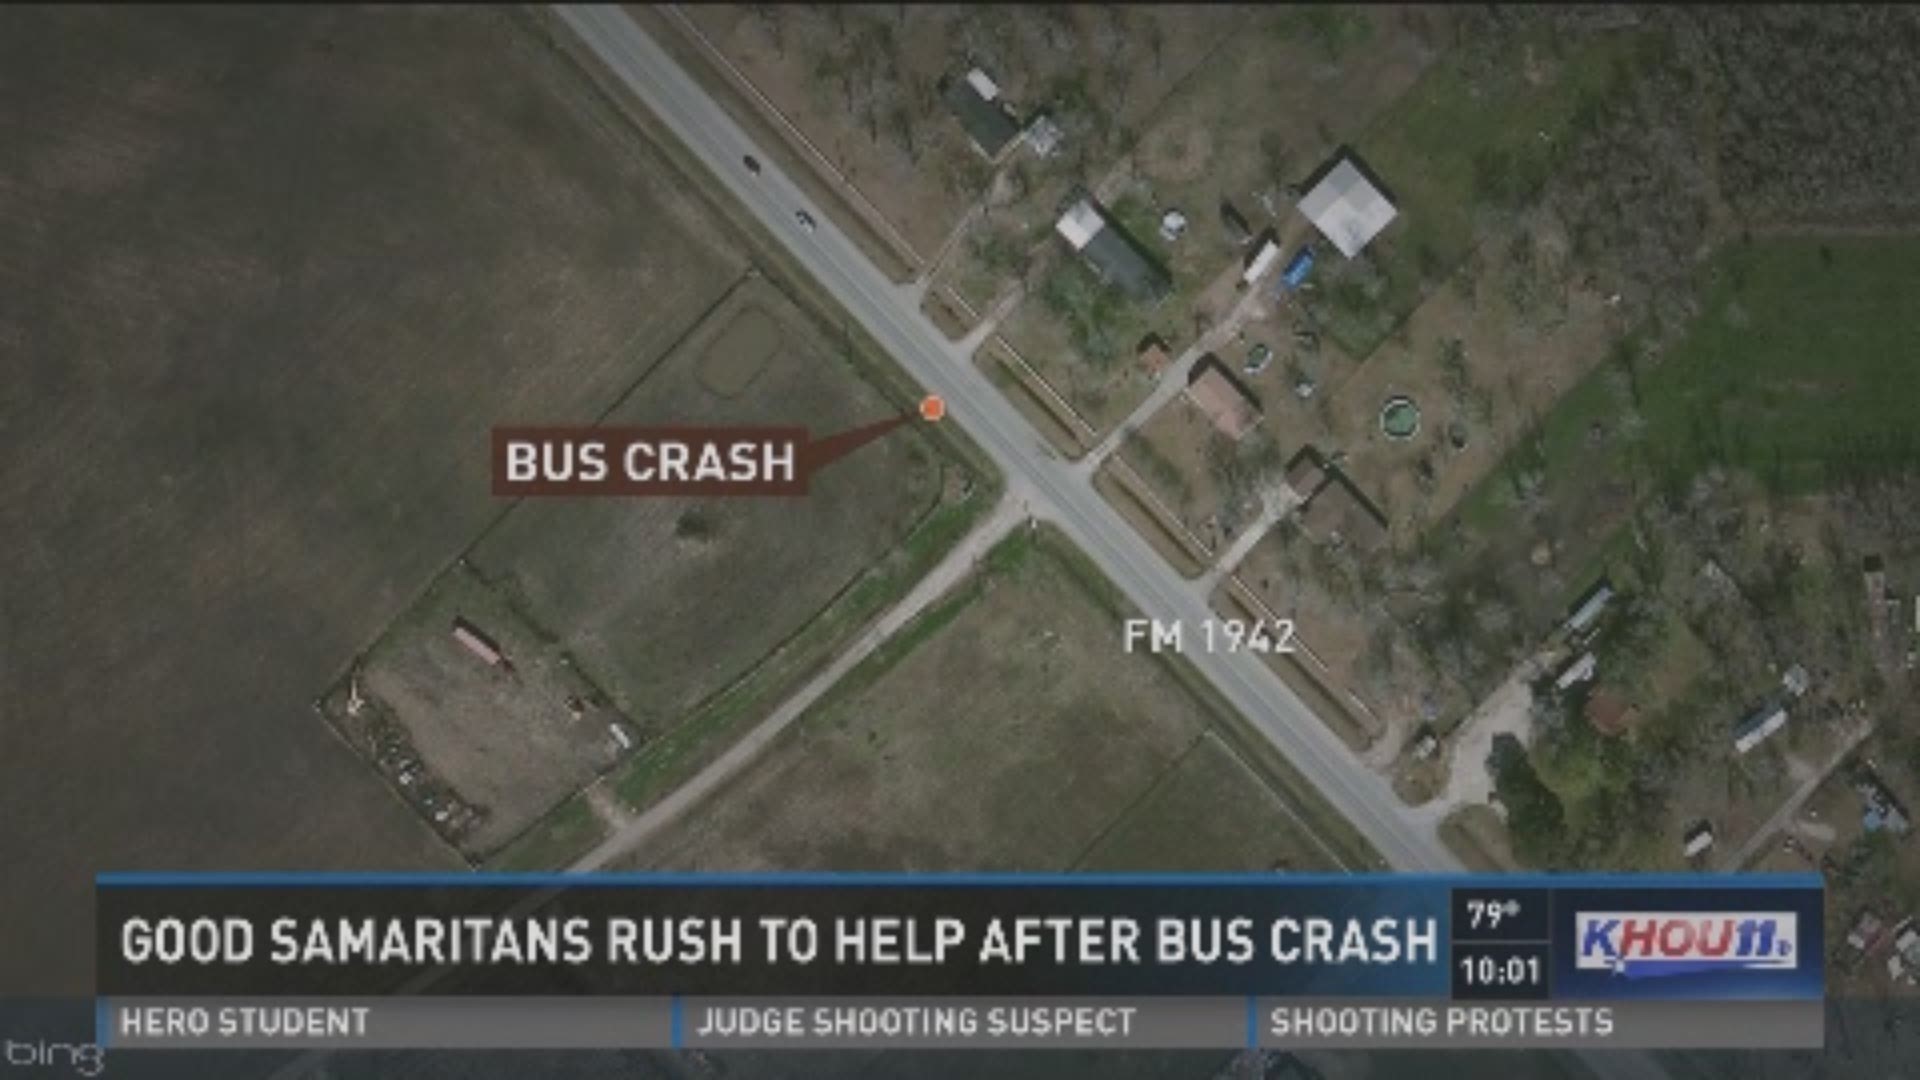 Good Samaritans came to the aid of more than a dozen people -- including students -- who were injured in a school bus crash in Crosby on Friday.